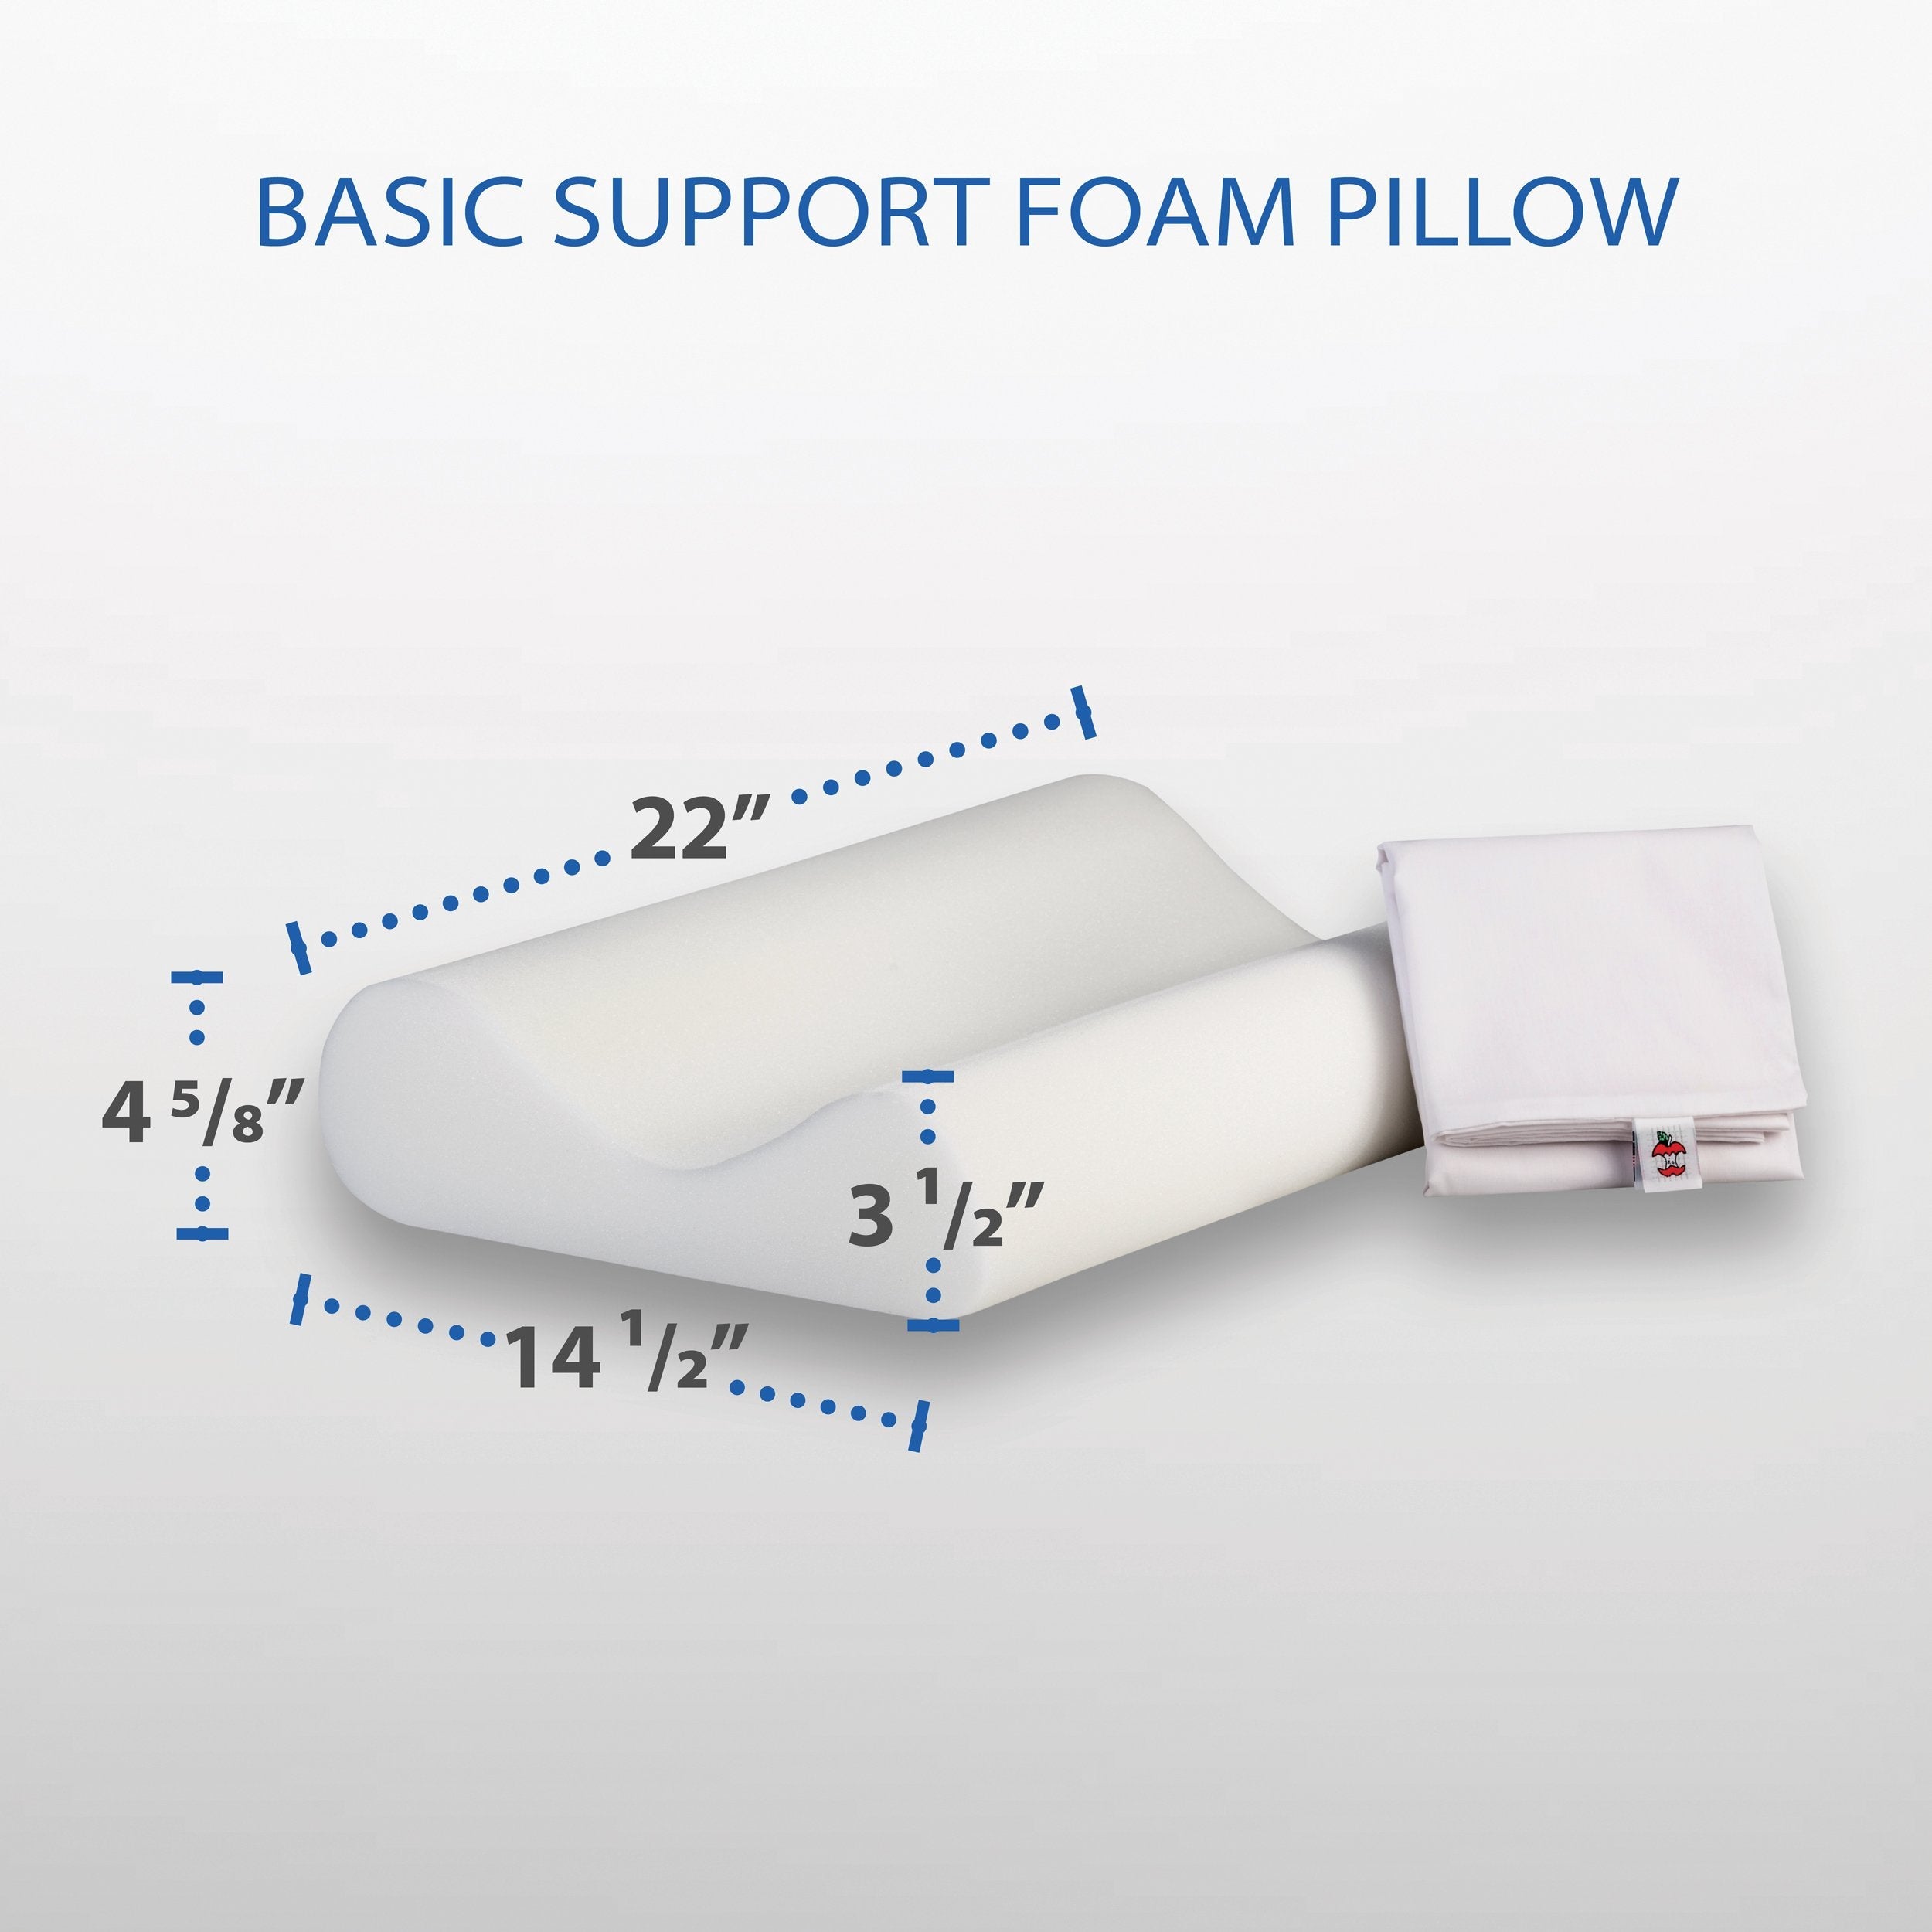 Basic Support Foam Cervical Pillow - Standard - physio supplies canada